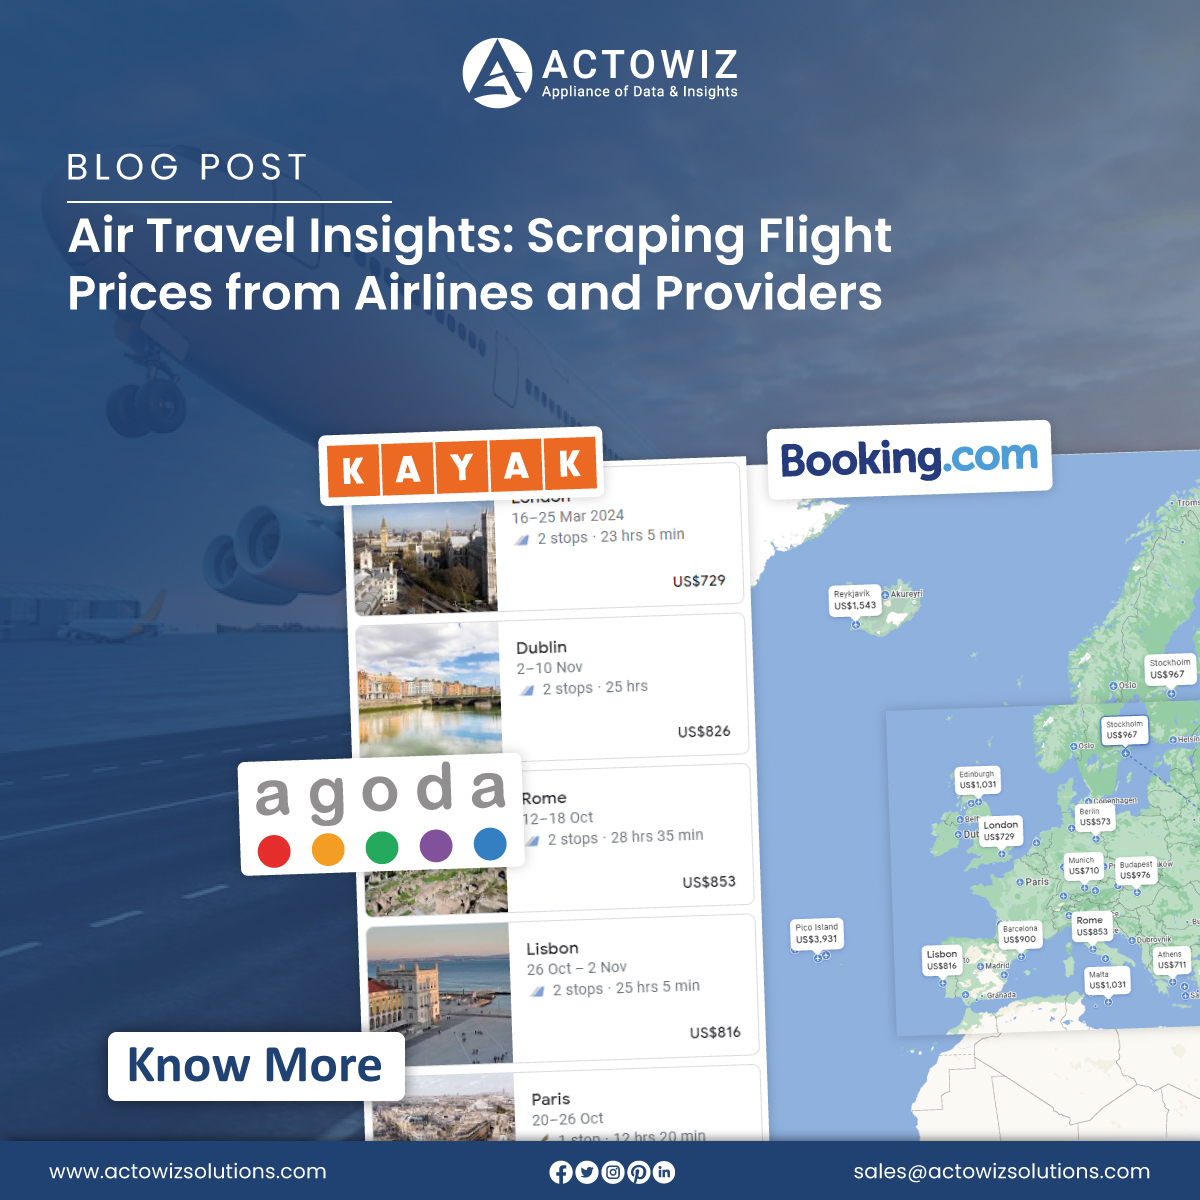 #ActowizSolutions welcomes you to explore the limitless possibilities of gaining a competitive edge & offering travelers the best deals available in the everevolving world of air travel.

medium.com/@actowiz/air-t…

#ScrapingFlightPrices #DataCollectionServices #usa #uk #uae